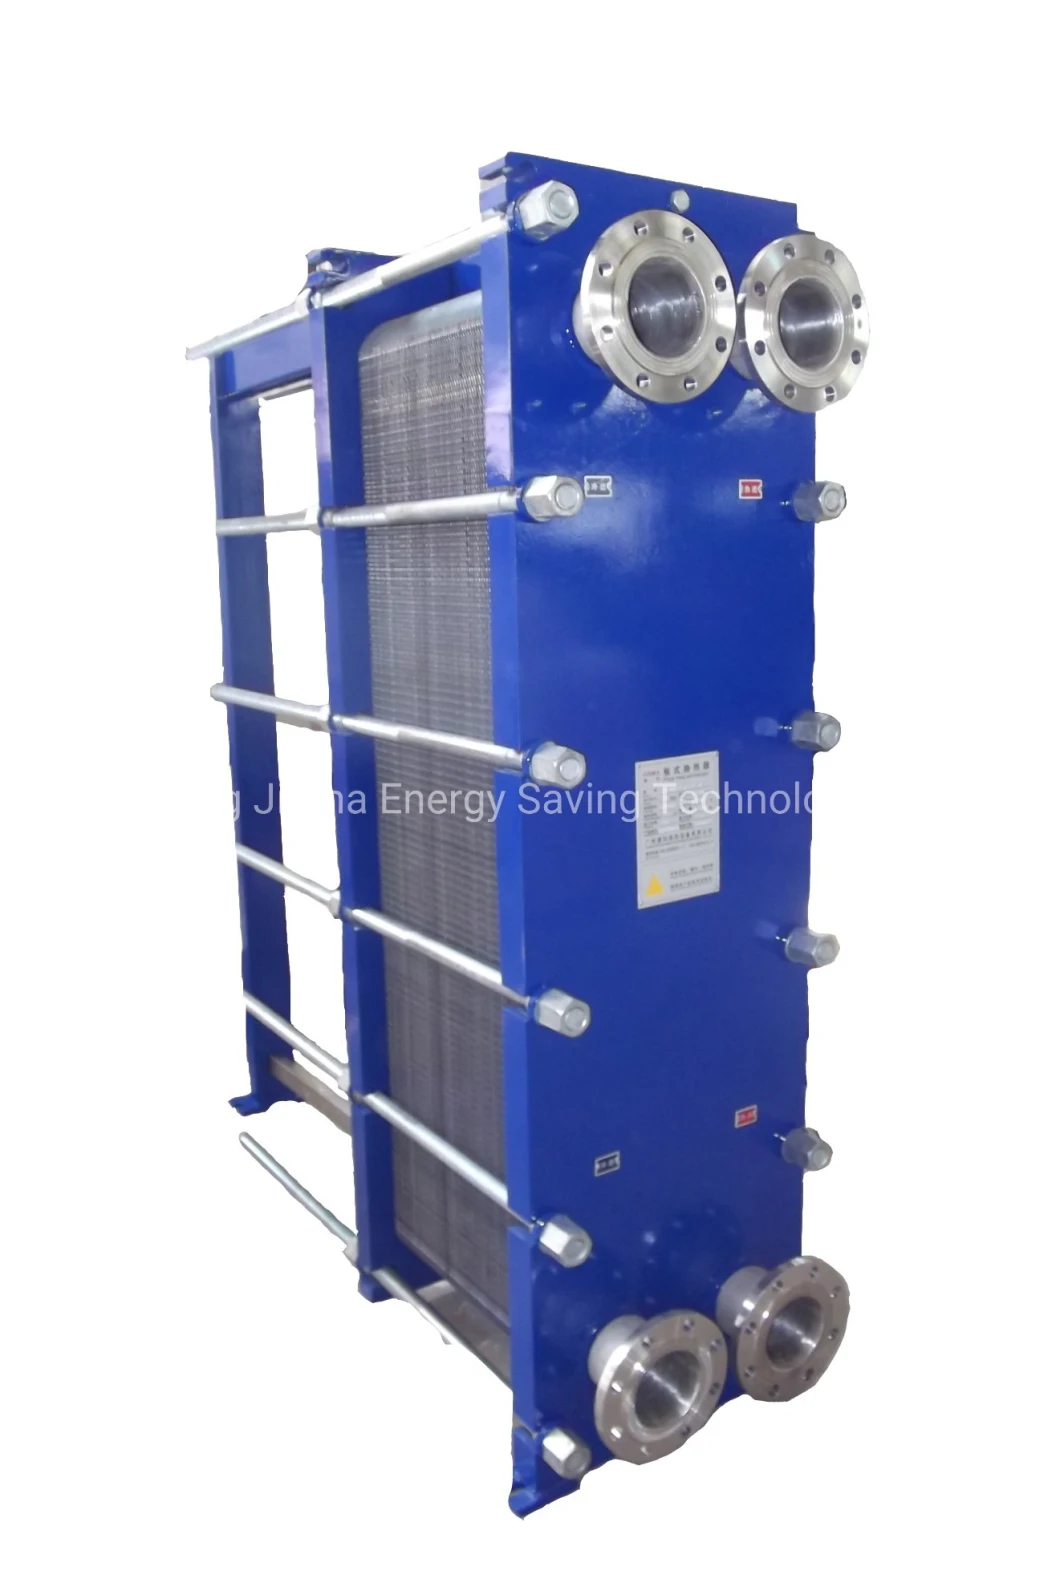 Phe Plate Heat Exchanger for HVAC - Heating/Air Conditioning Thermal Storage Systems